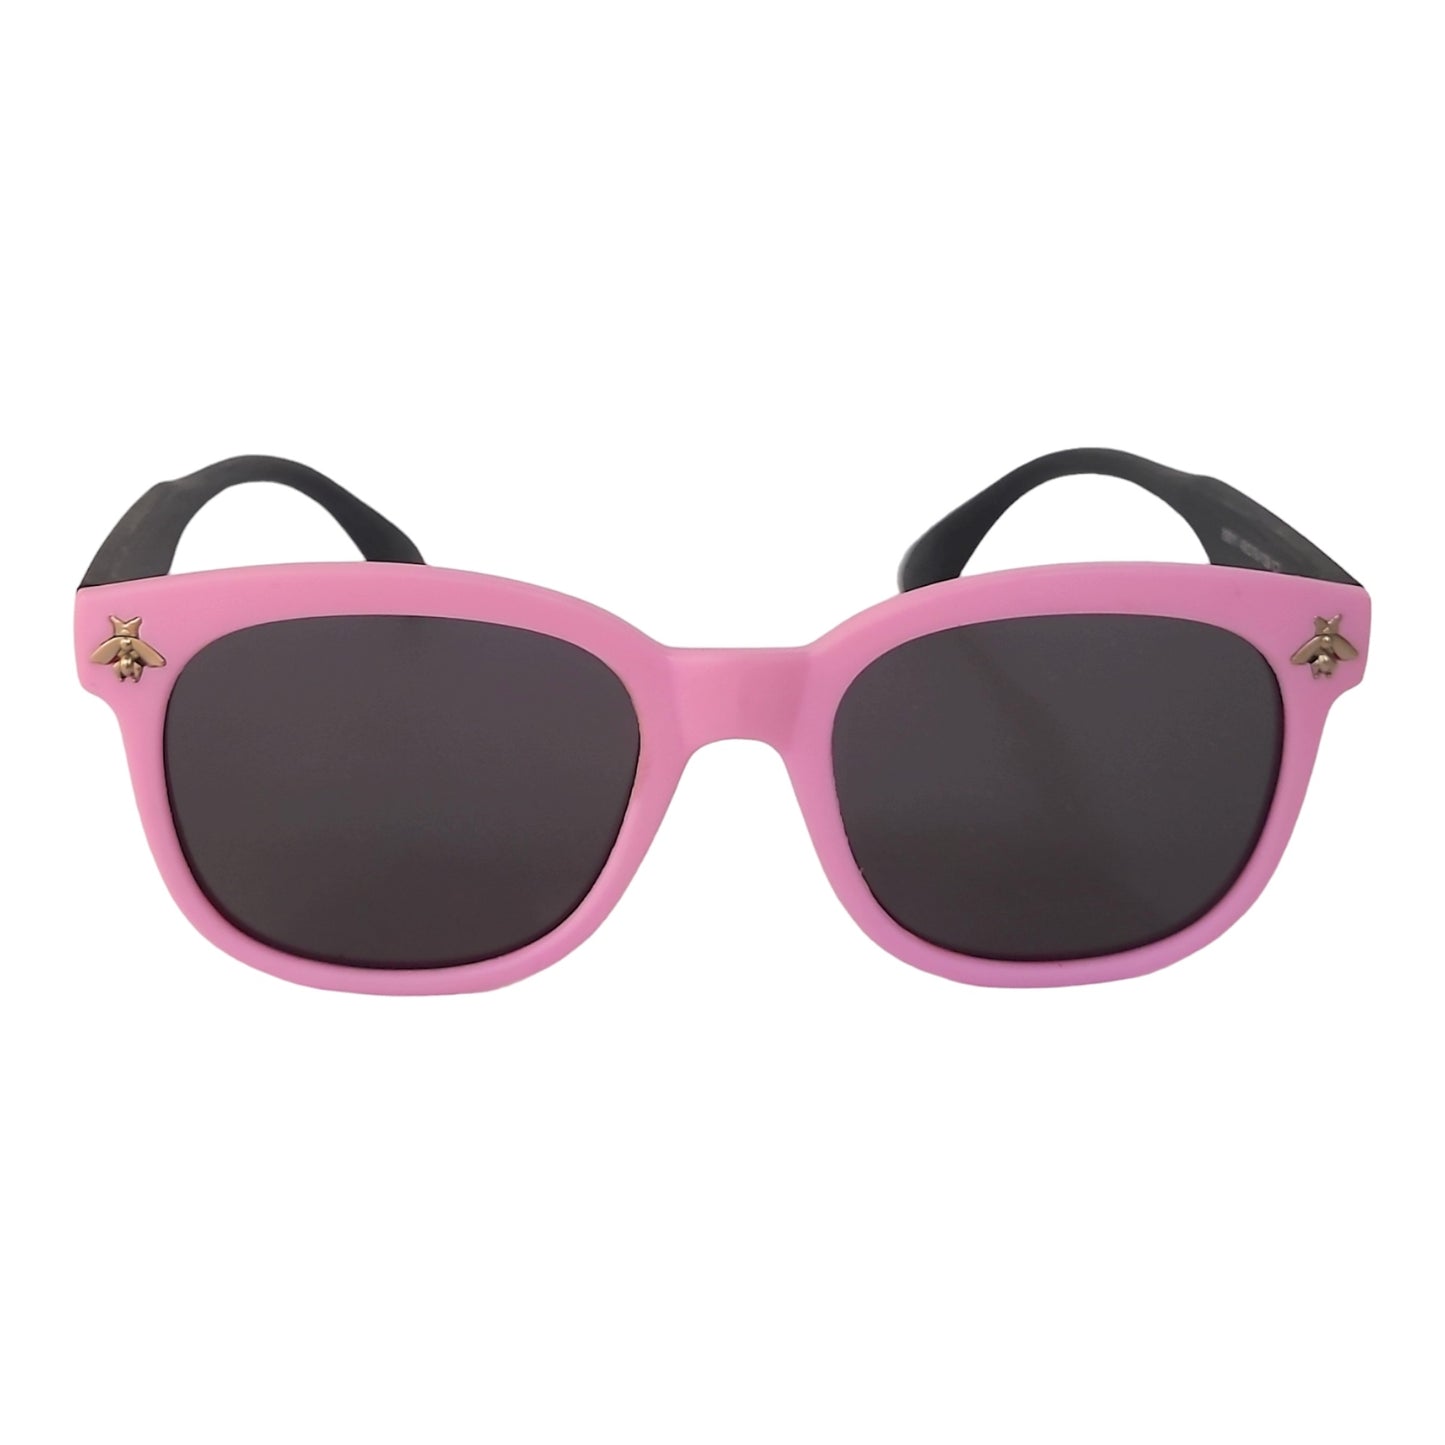 Stylish Kids Polarized Sunglasses for Shades Age 4-9 Years Old, Girl or Boy  | affaires-9011 - Purple-Black